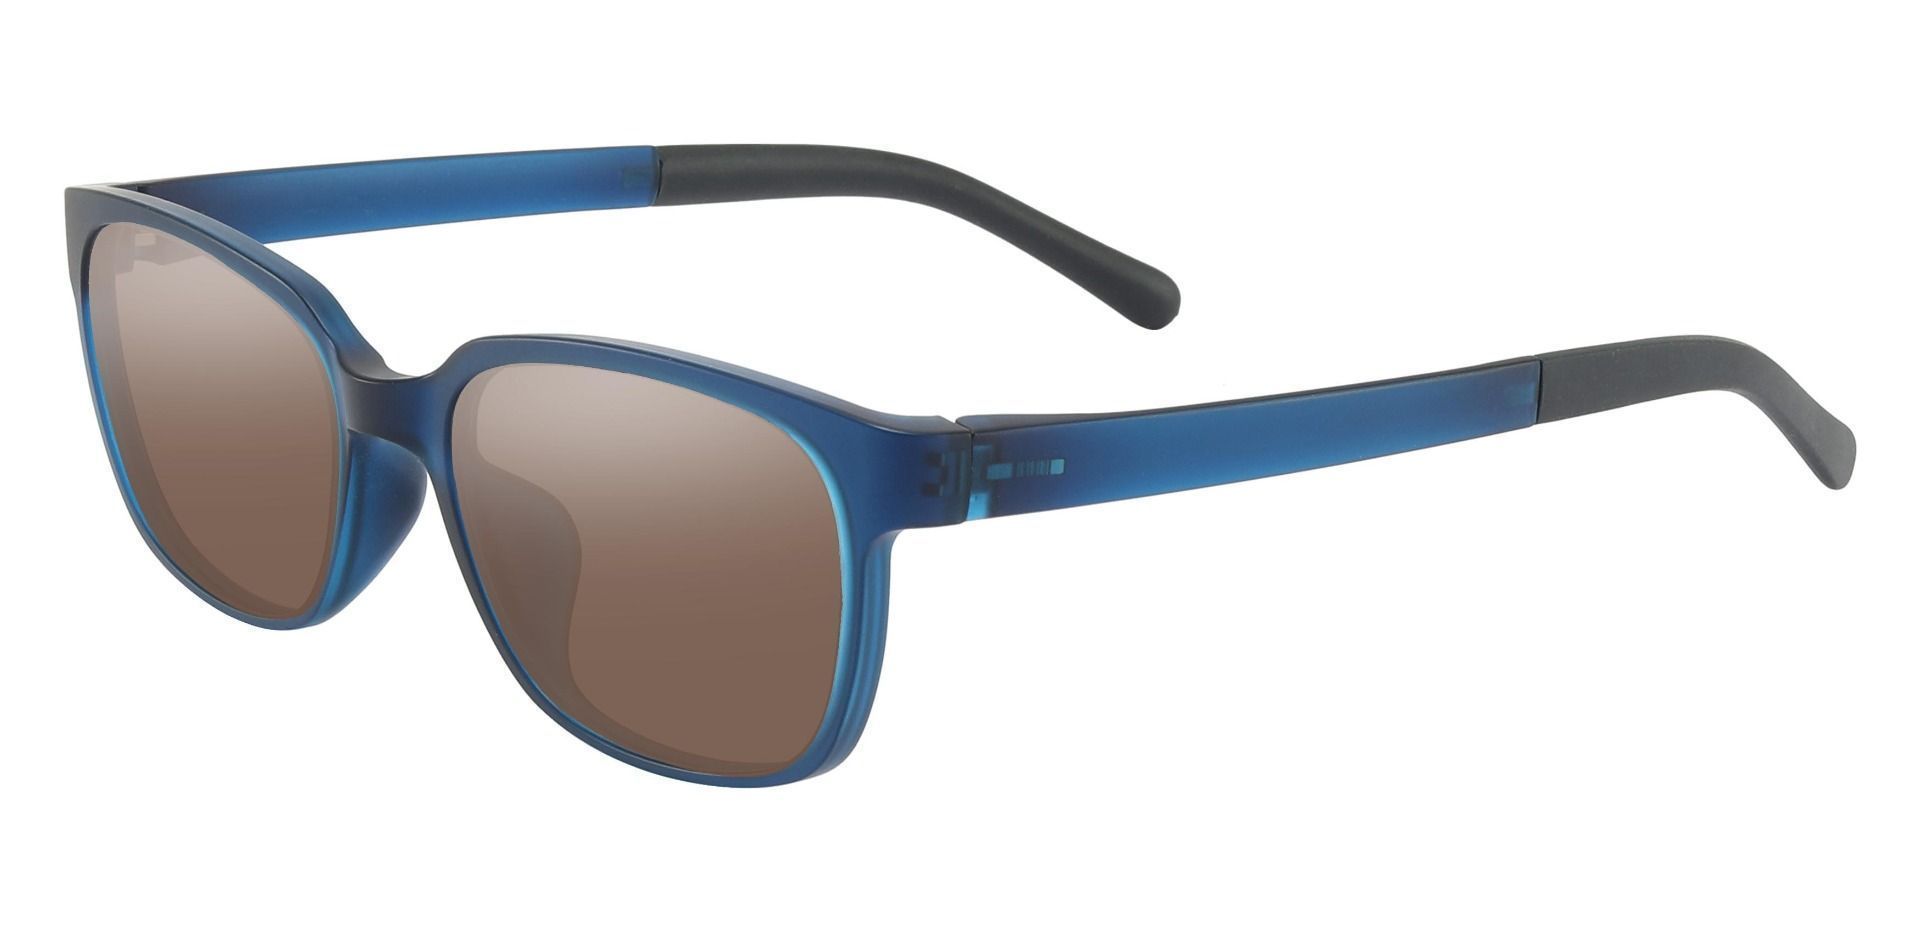 Orchard Rectangle Prescription Sunglasses - Blue Frame With Brown Lenses